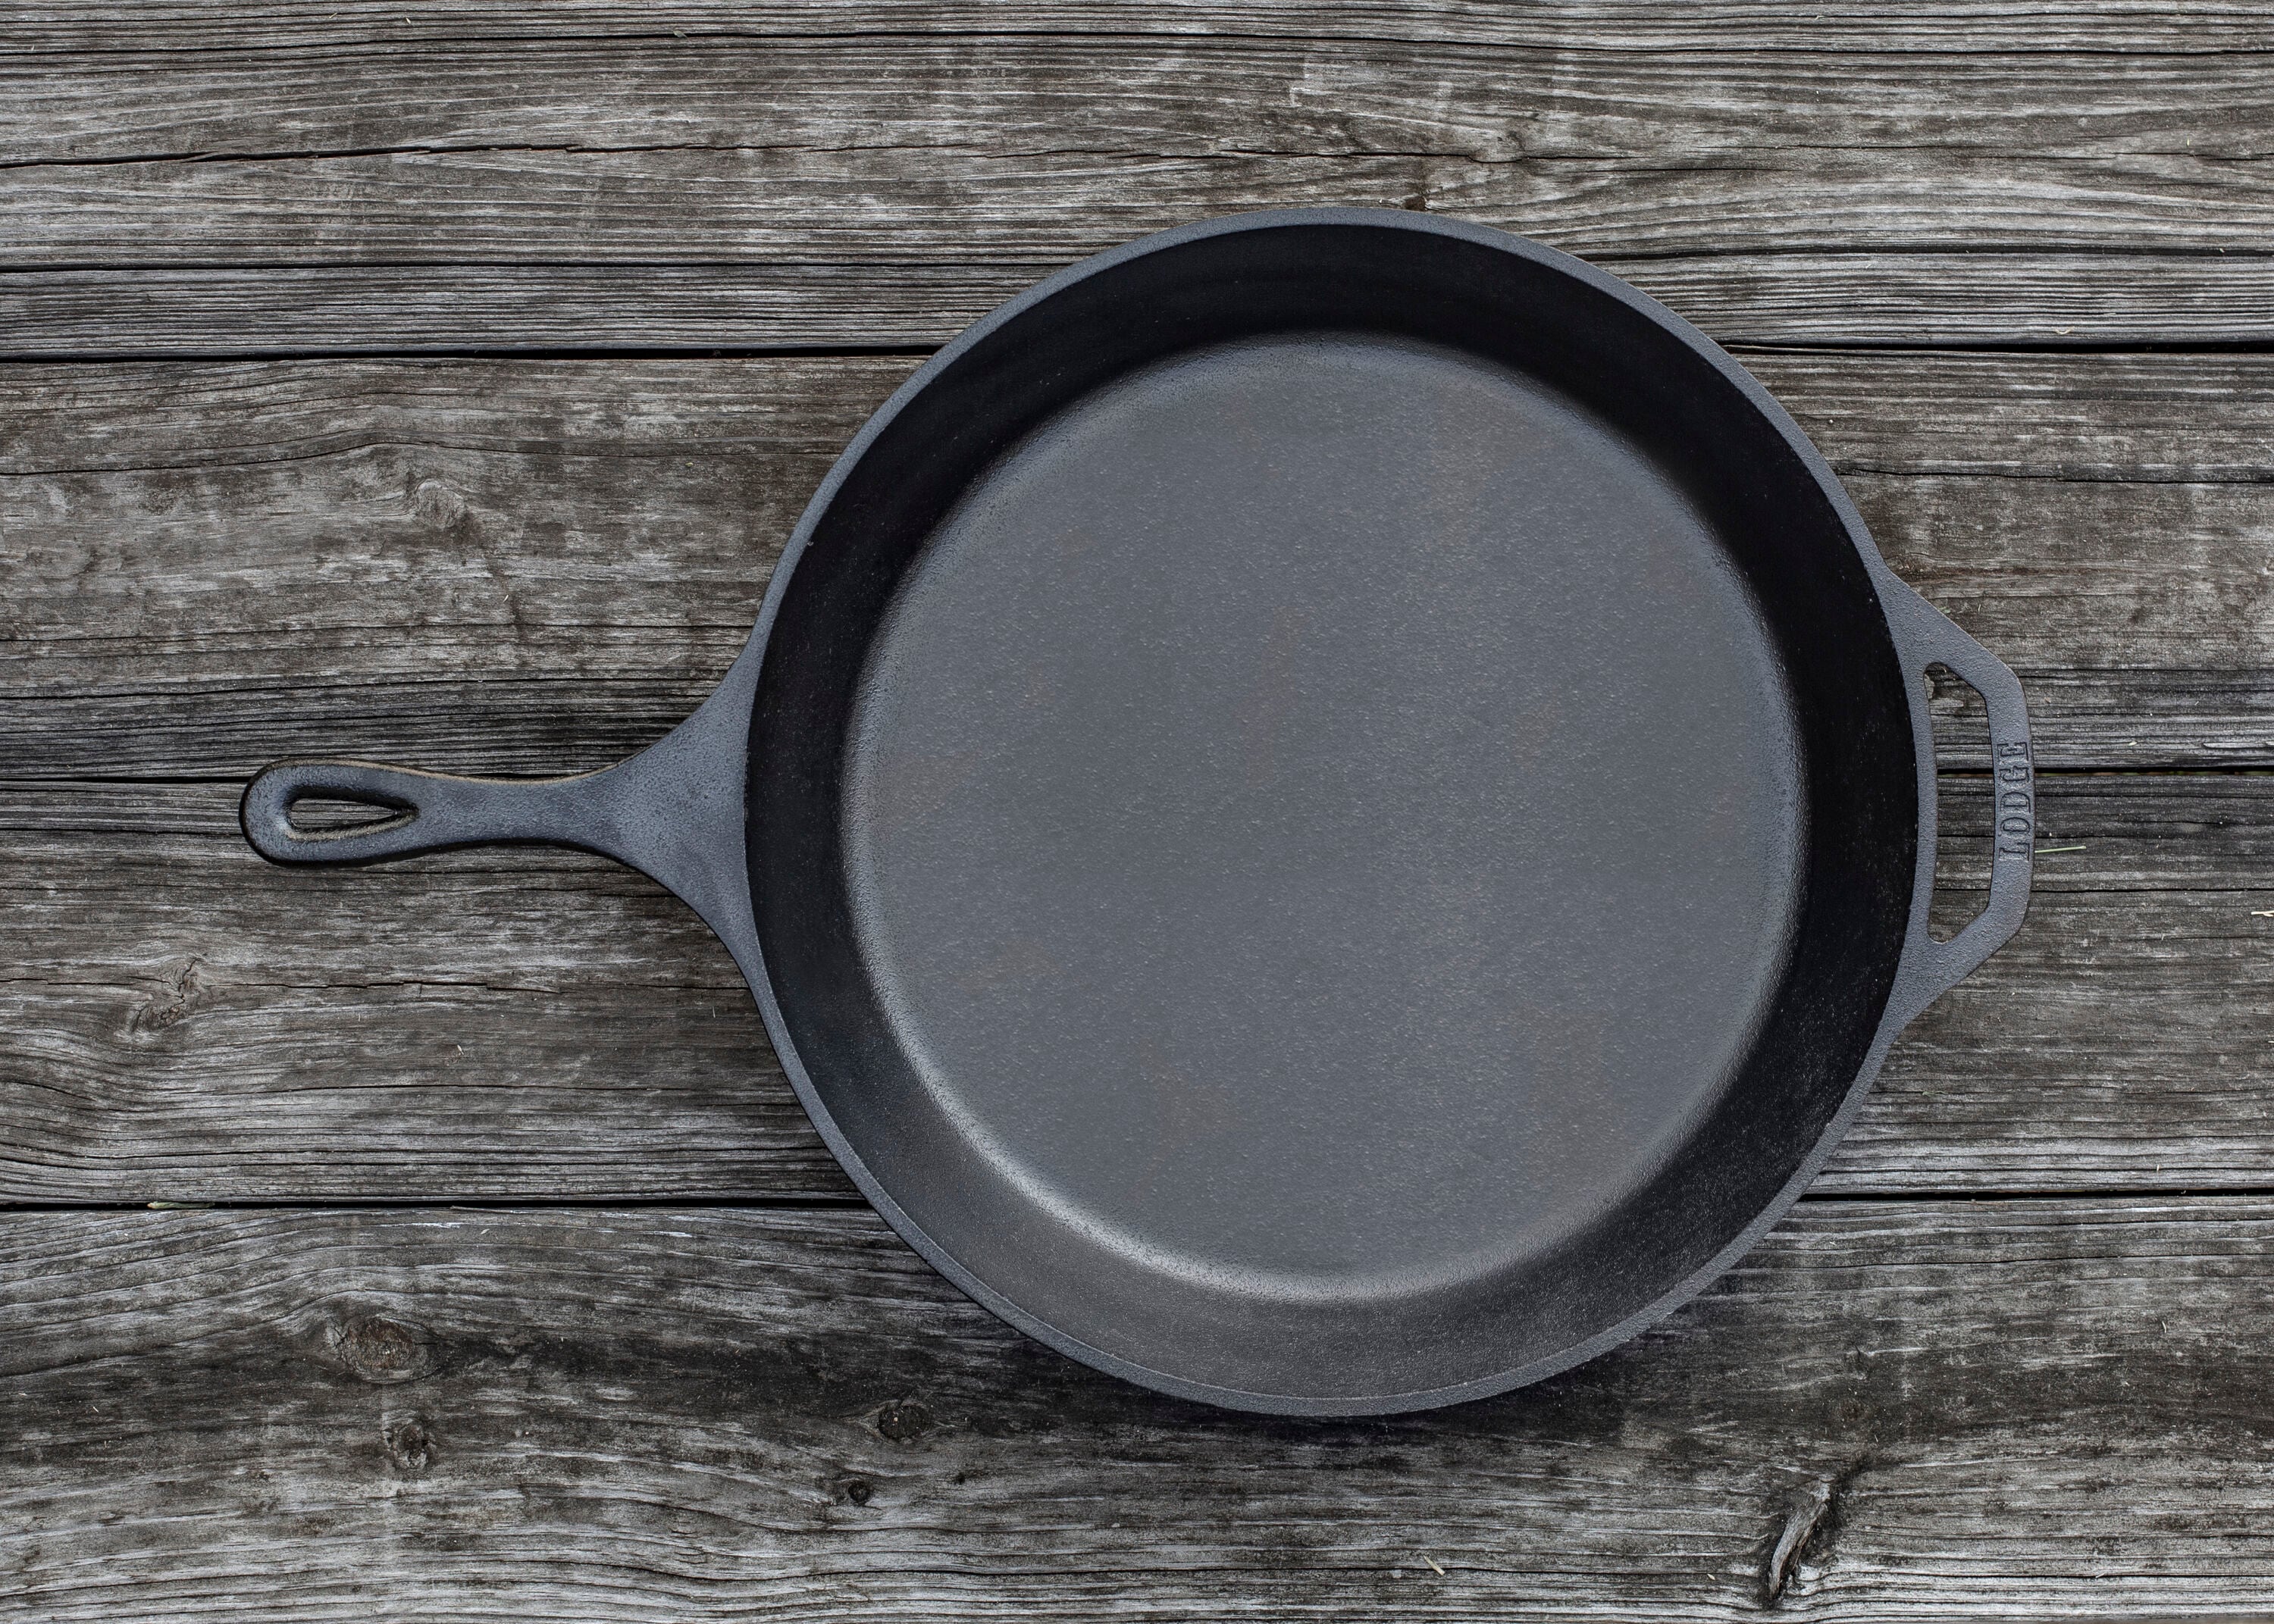 Lodge Cast Iron 15 Inch Cast Iron Skillet - Induction Compatible